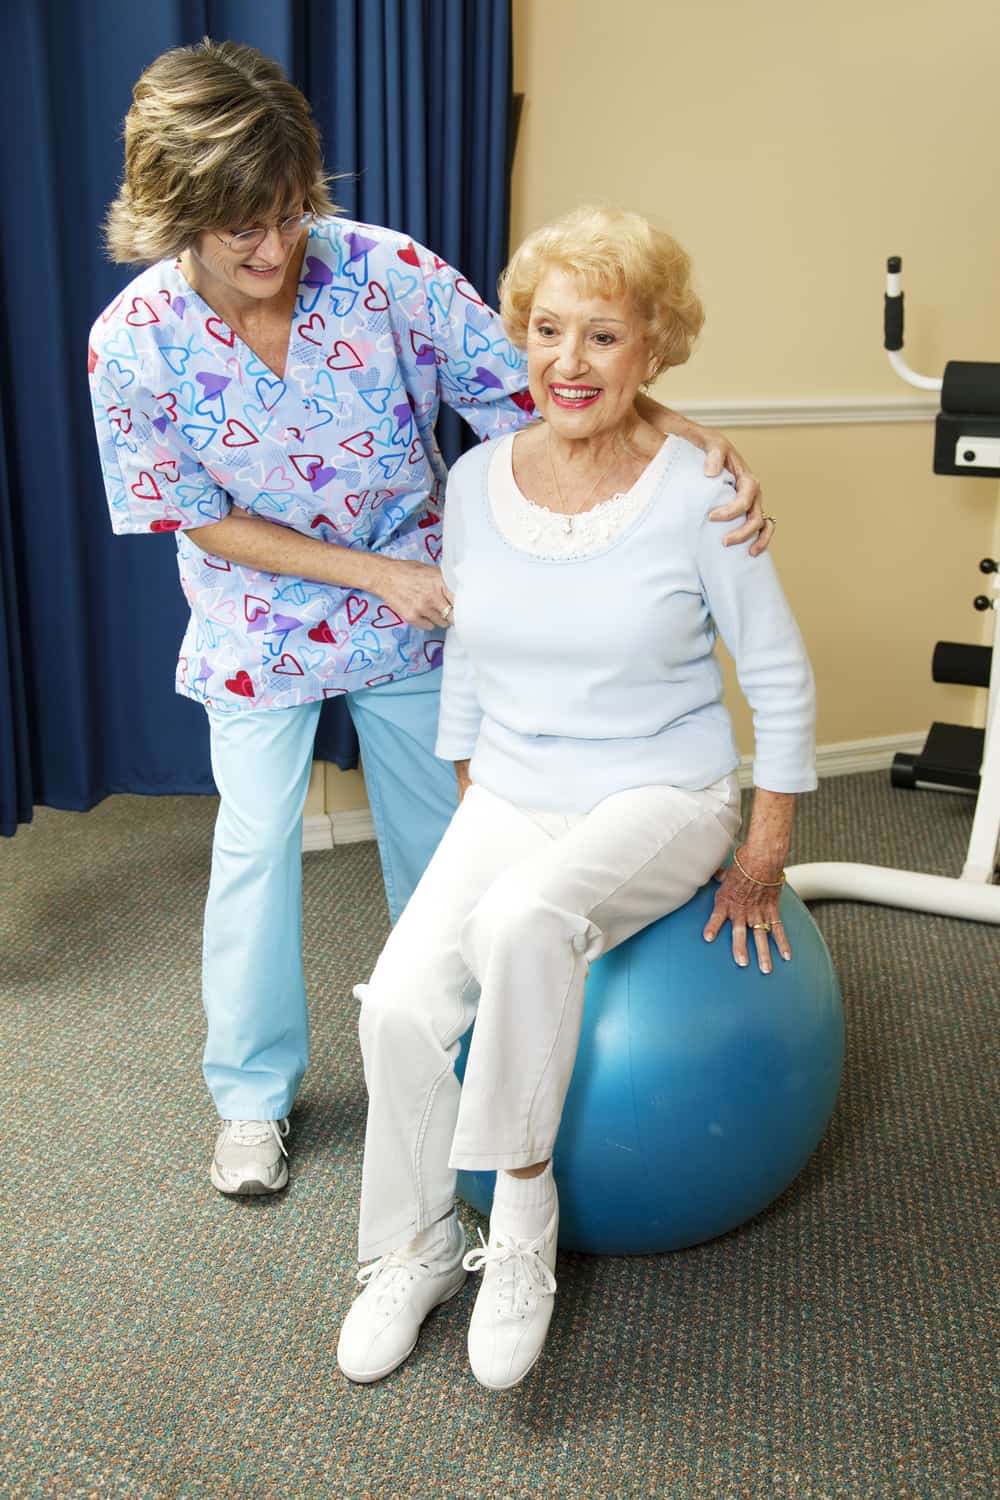 Therapist helping elderly woman with balance ball to improve balance and Limited Range of Motion in the Leg